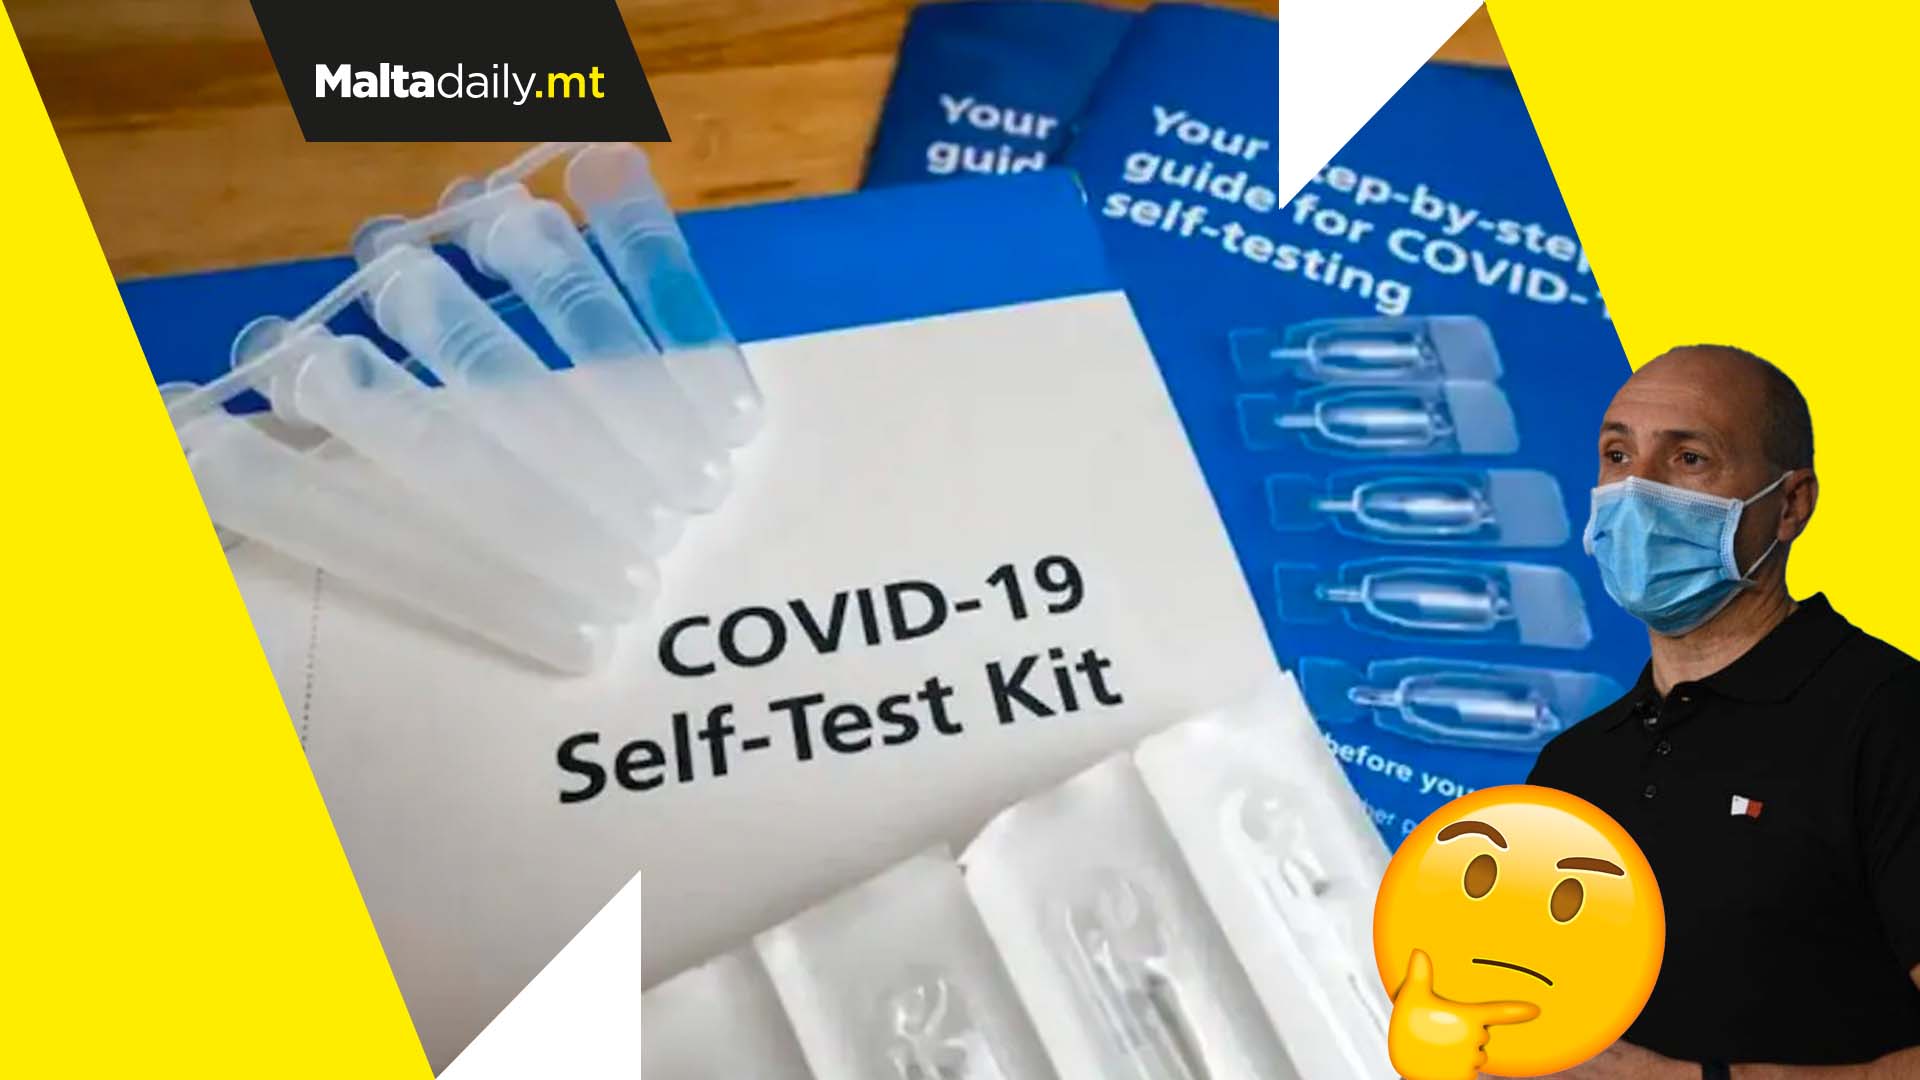 Pharmacies not permitted to sell self-testing COVID kits as of yet